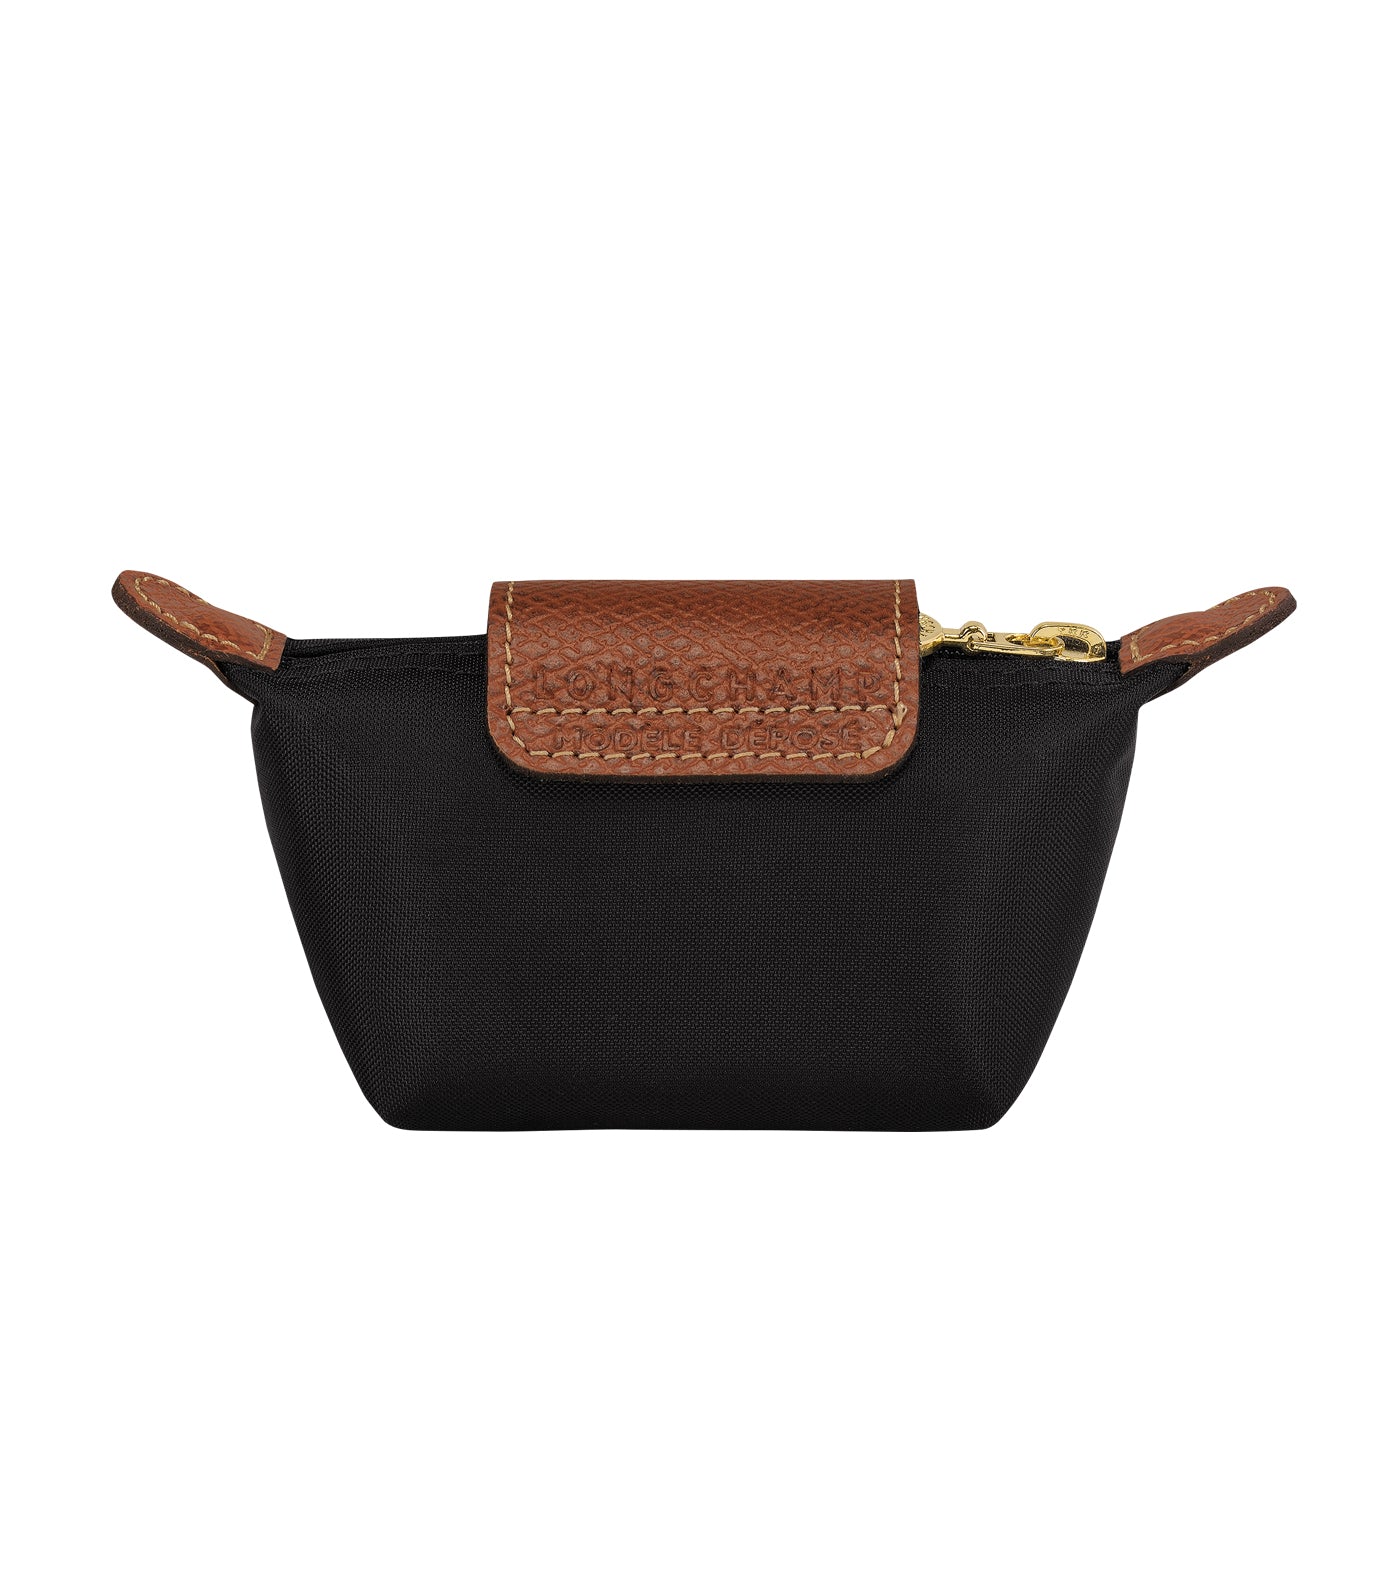 Le Pliage Original Pouch with handle Black - Recycled canvas (34175089001)